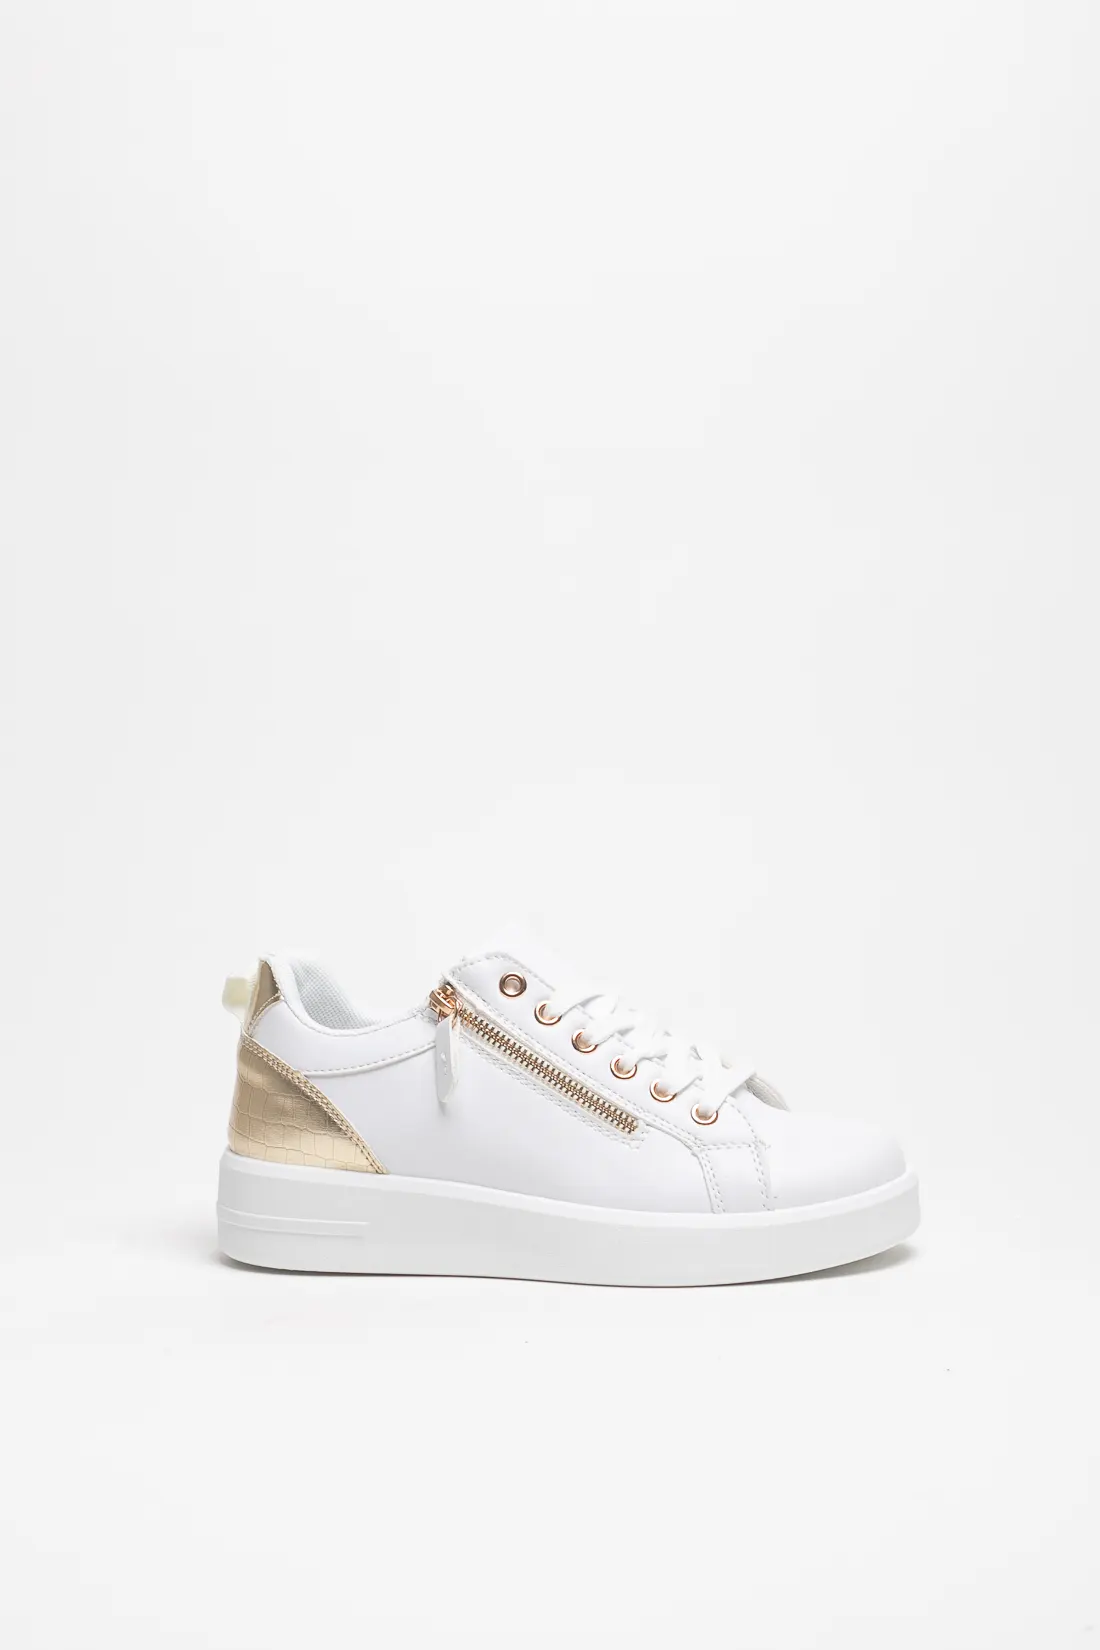 CASUAL SNEAKERS KALA - WHITE/GOLD